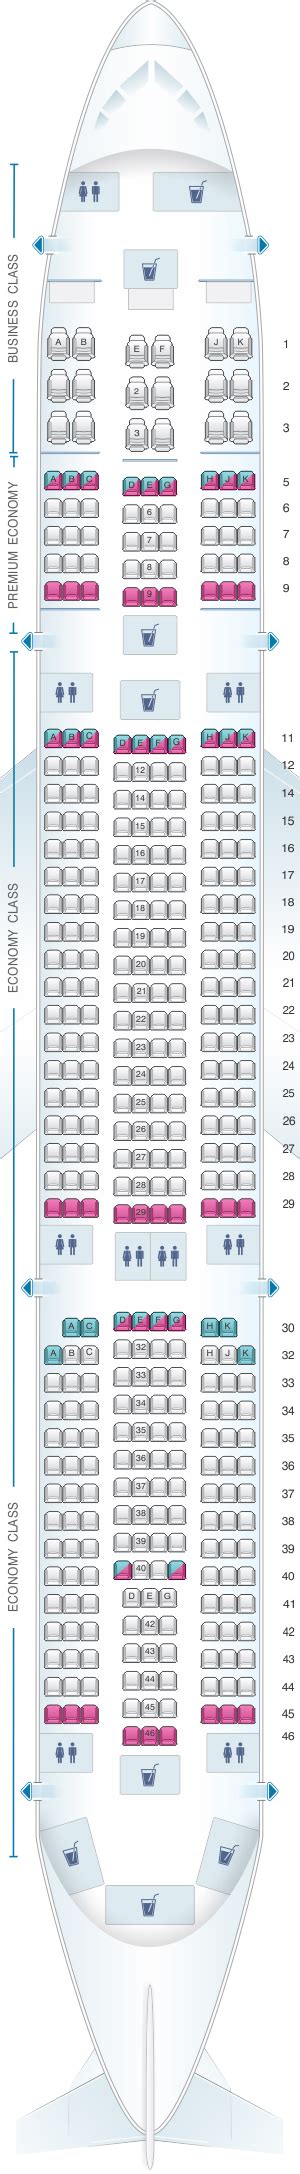 Airbus A350 900 Seat Map